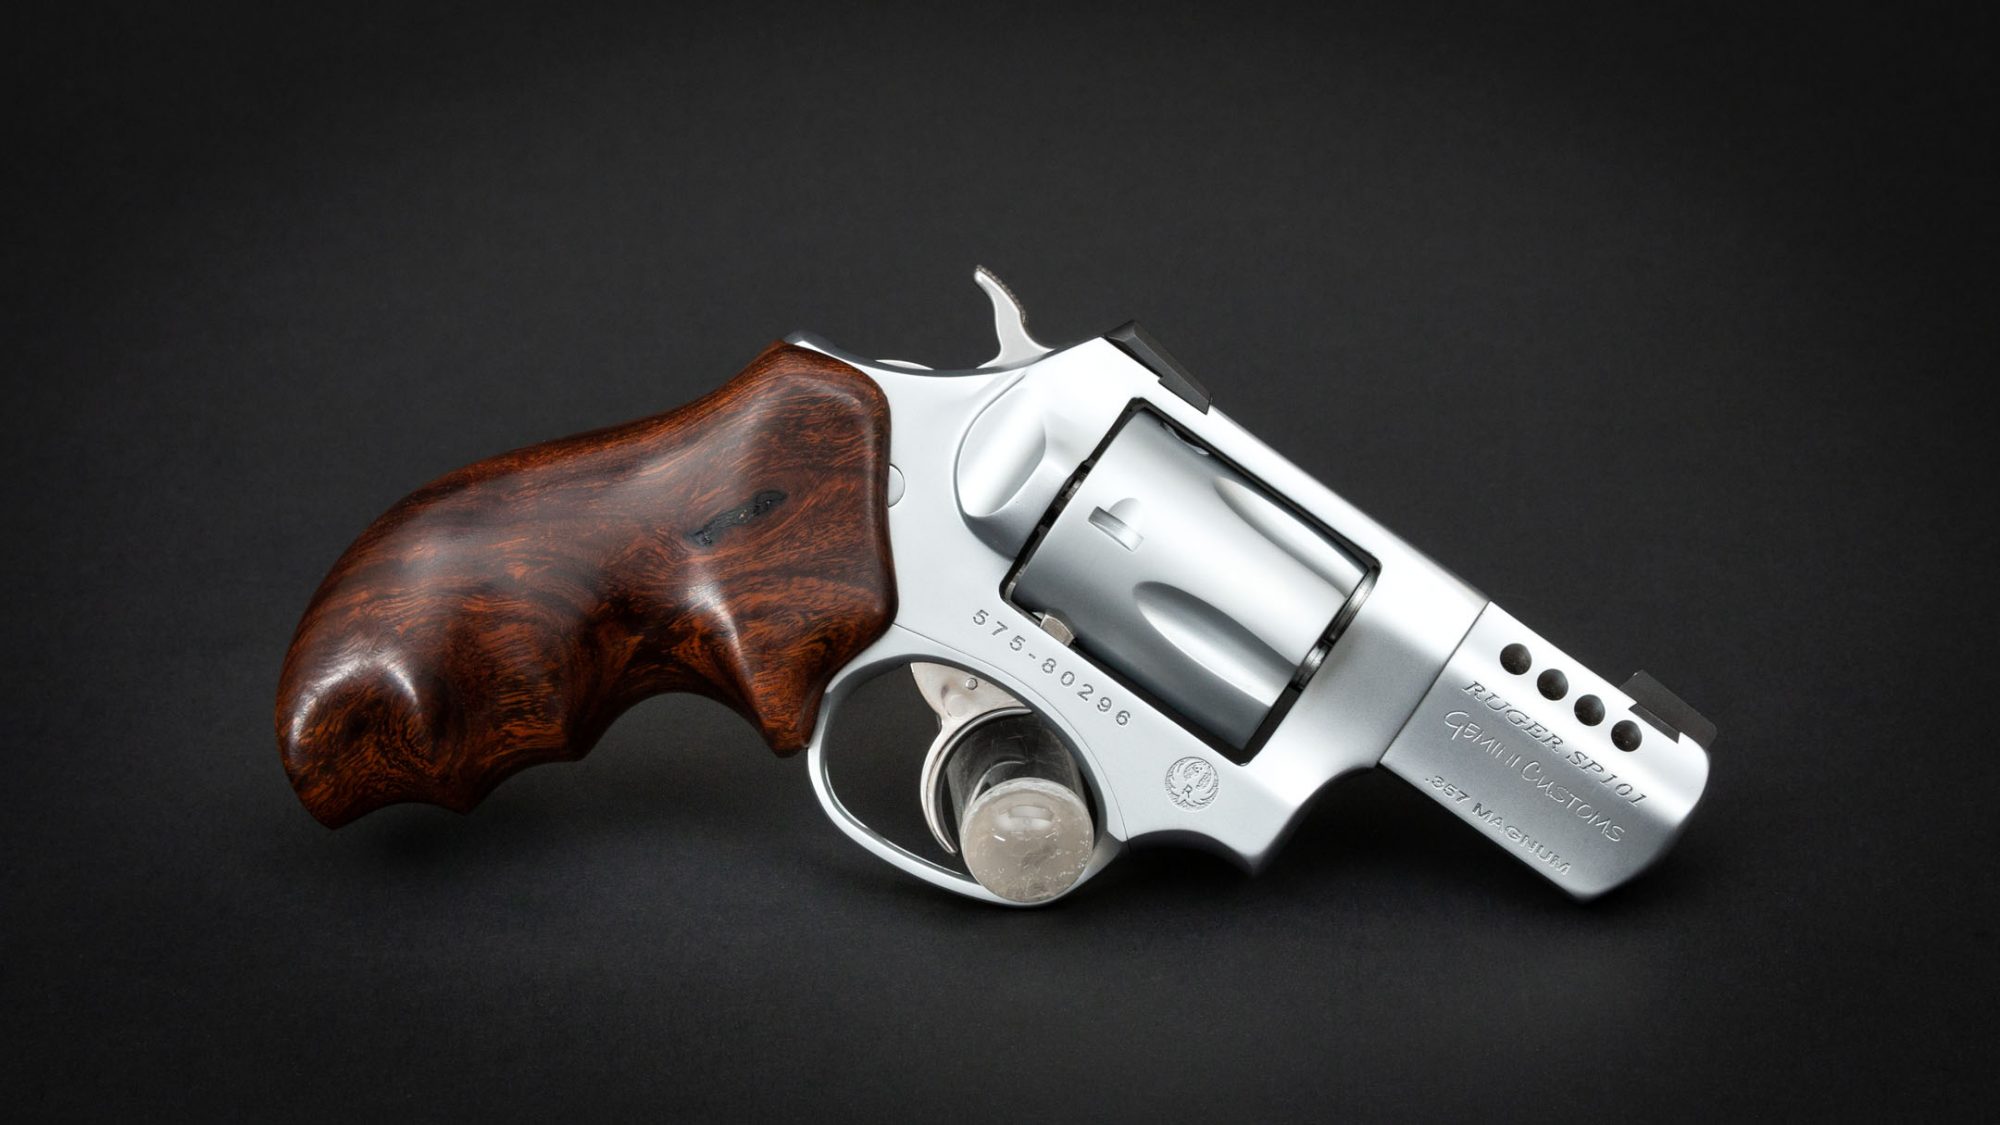 Ruger SP101 in 357 Magnum with custom work performed by Gemini Customs, for sale by Turnbull Restoration Co. of Bloomfield, NY